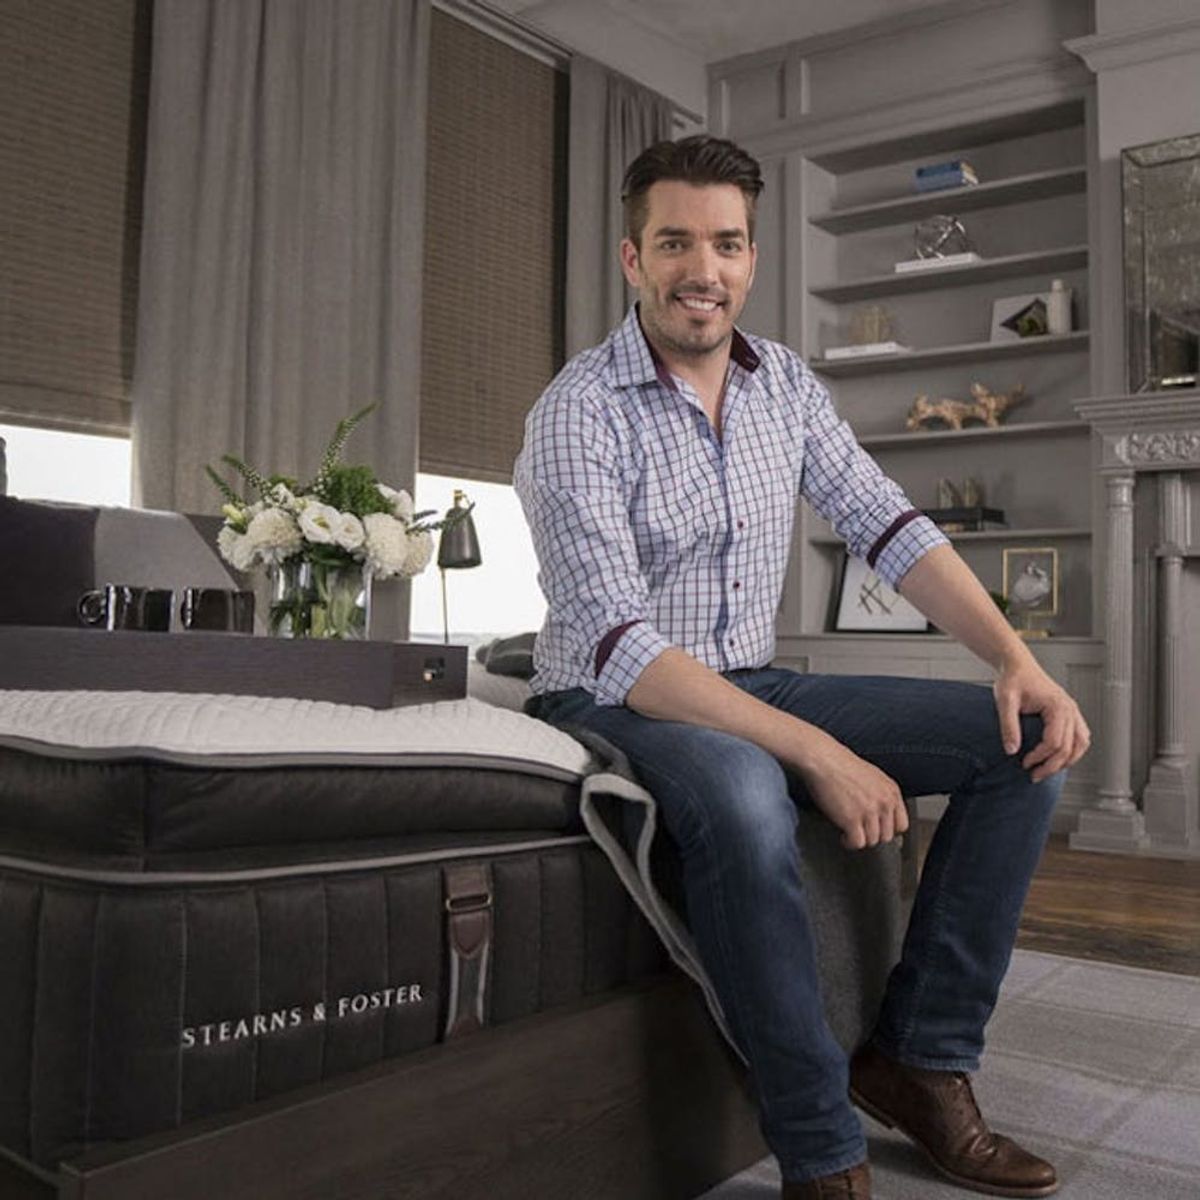 Property Brothers’ Jonathan Scott’s Top Tips for Decorating Your Bedroom